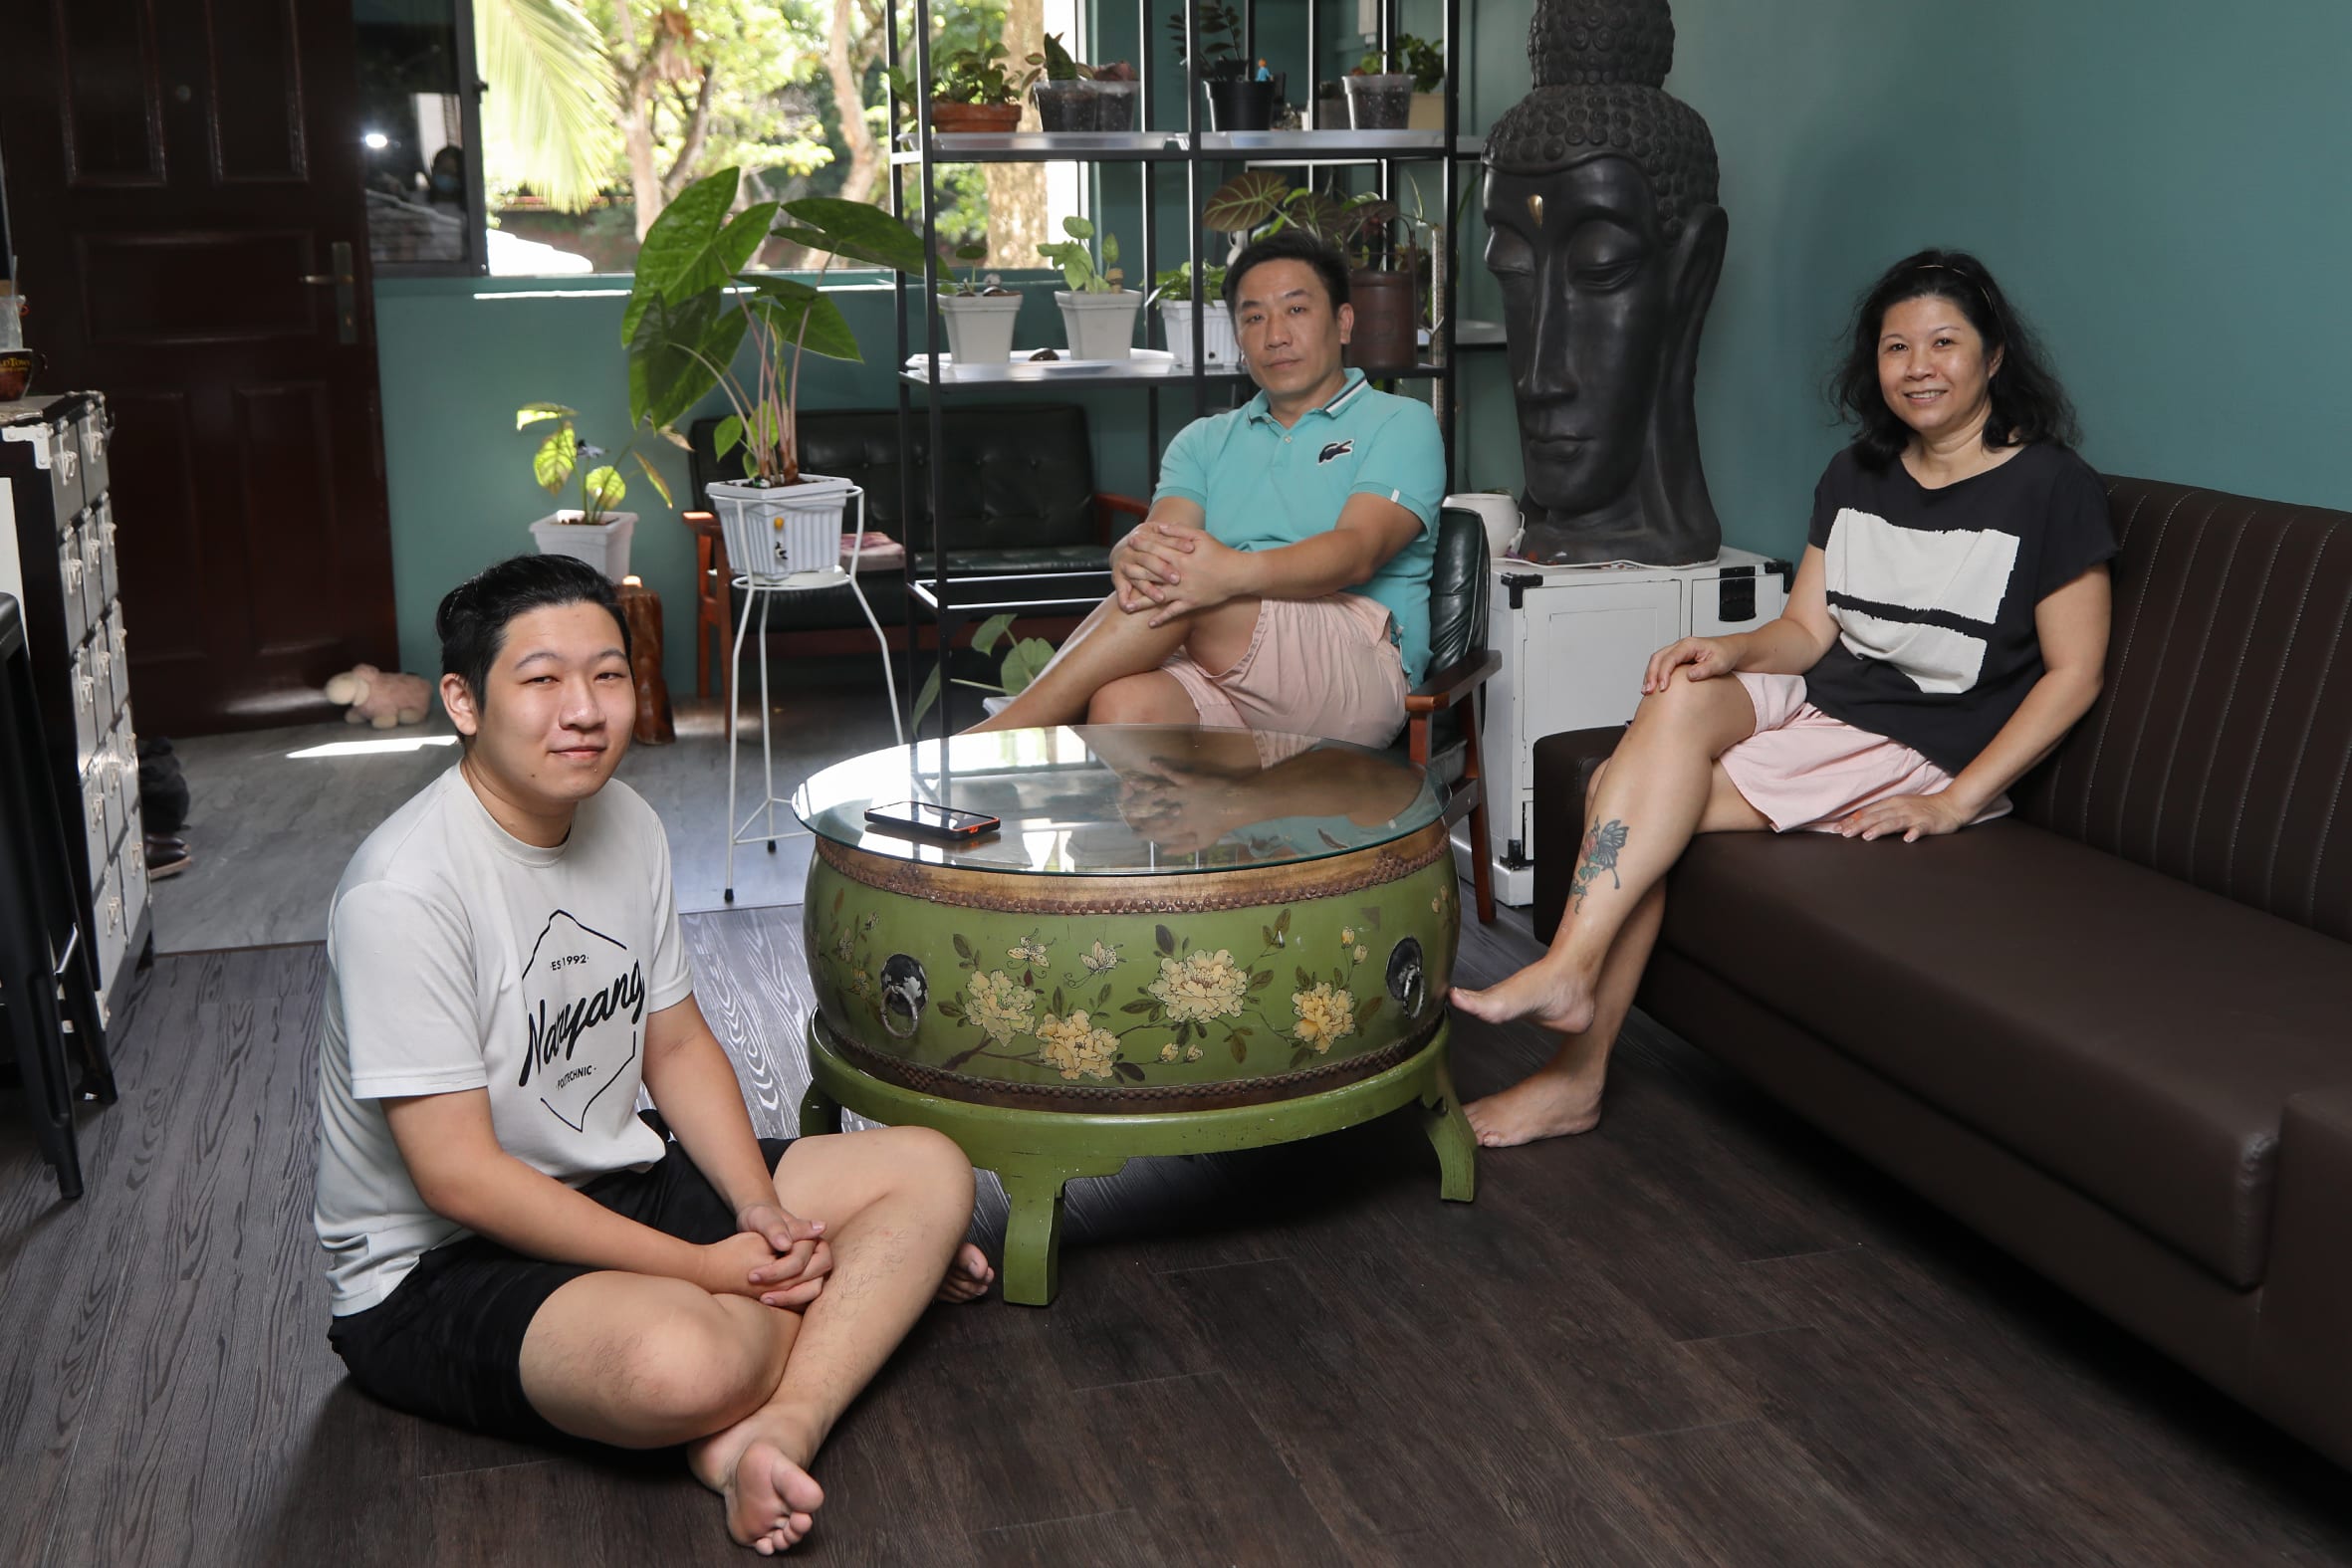 Mr Tan Chun Heng with his wife Kiong May Lee and their son Hugo. The family just moved into their Marsiling Crescent home in the middle of May 2022.